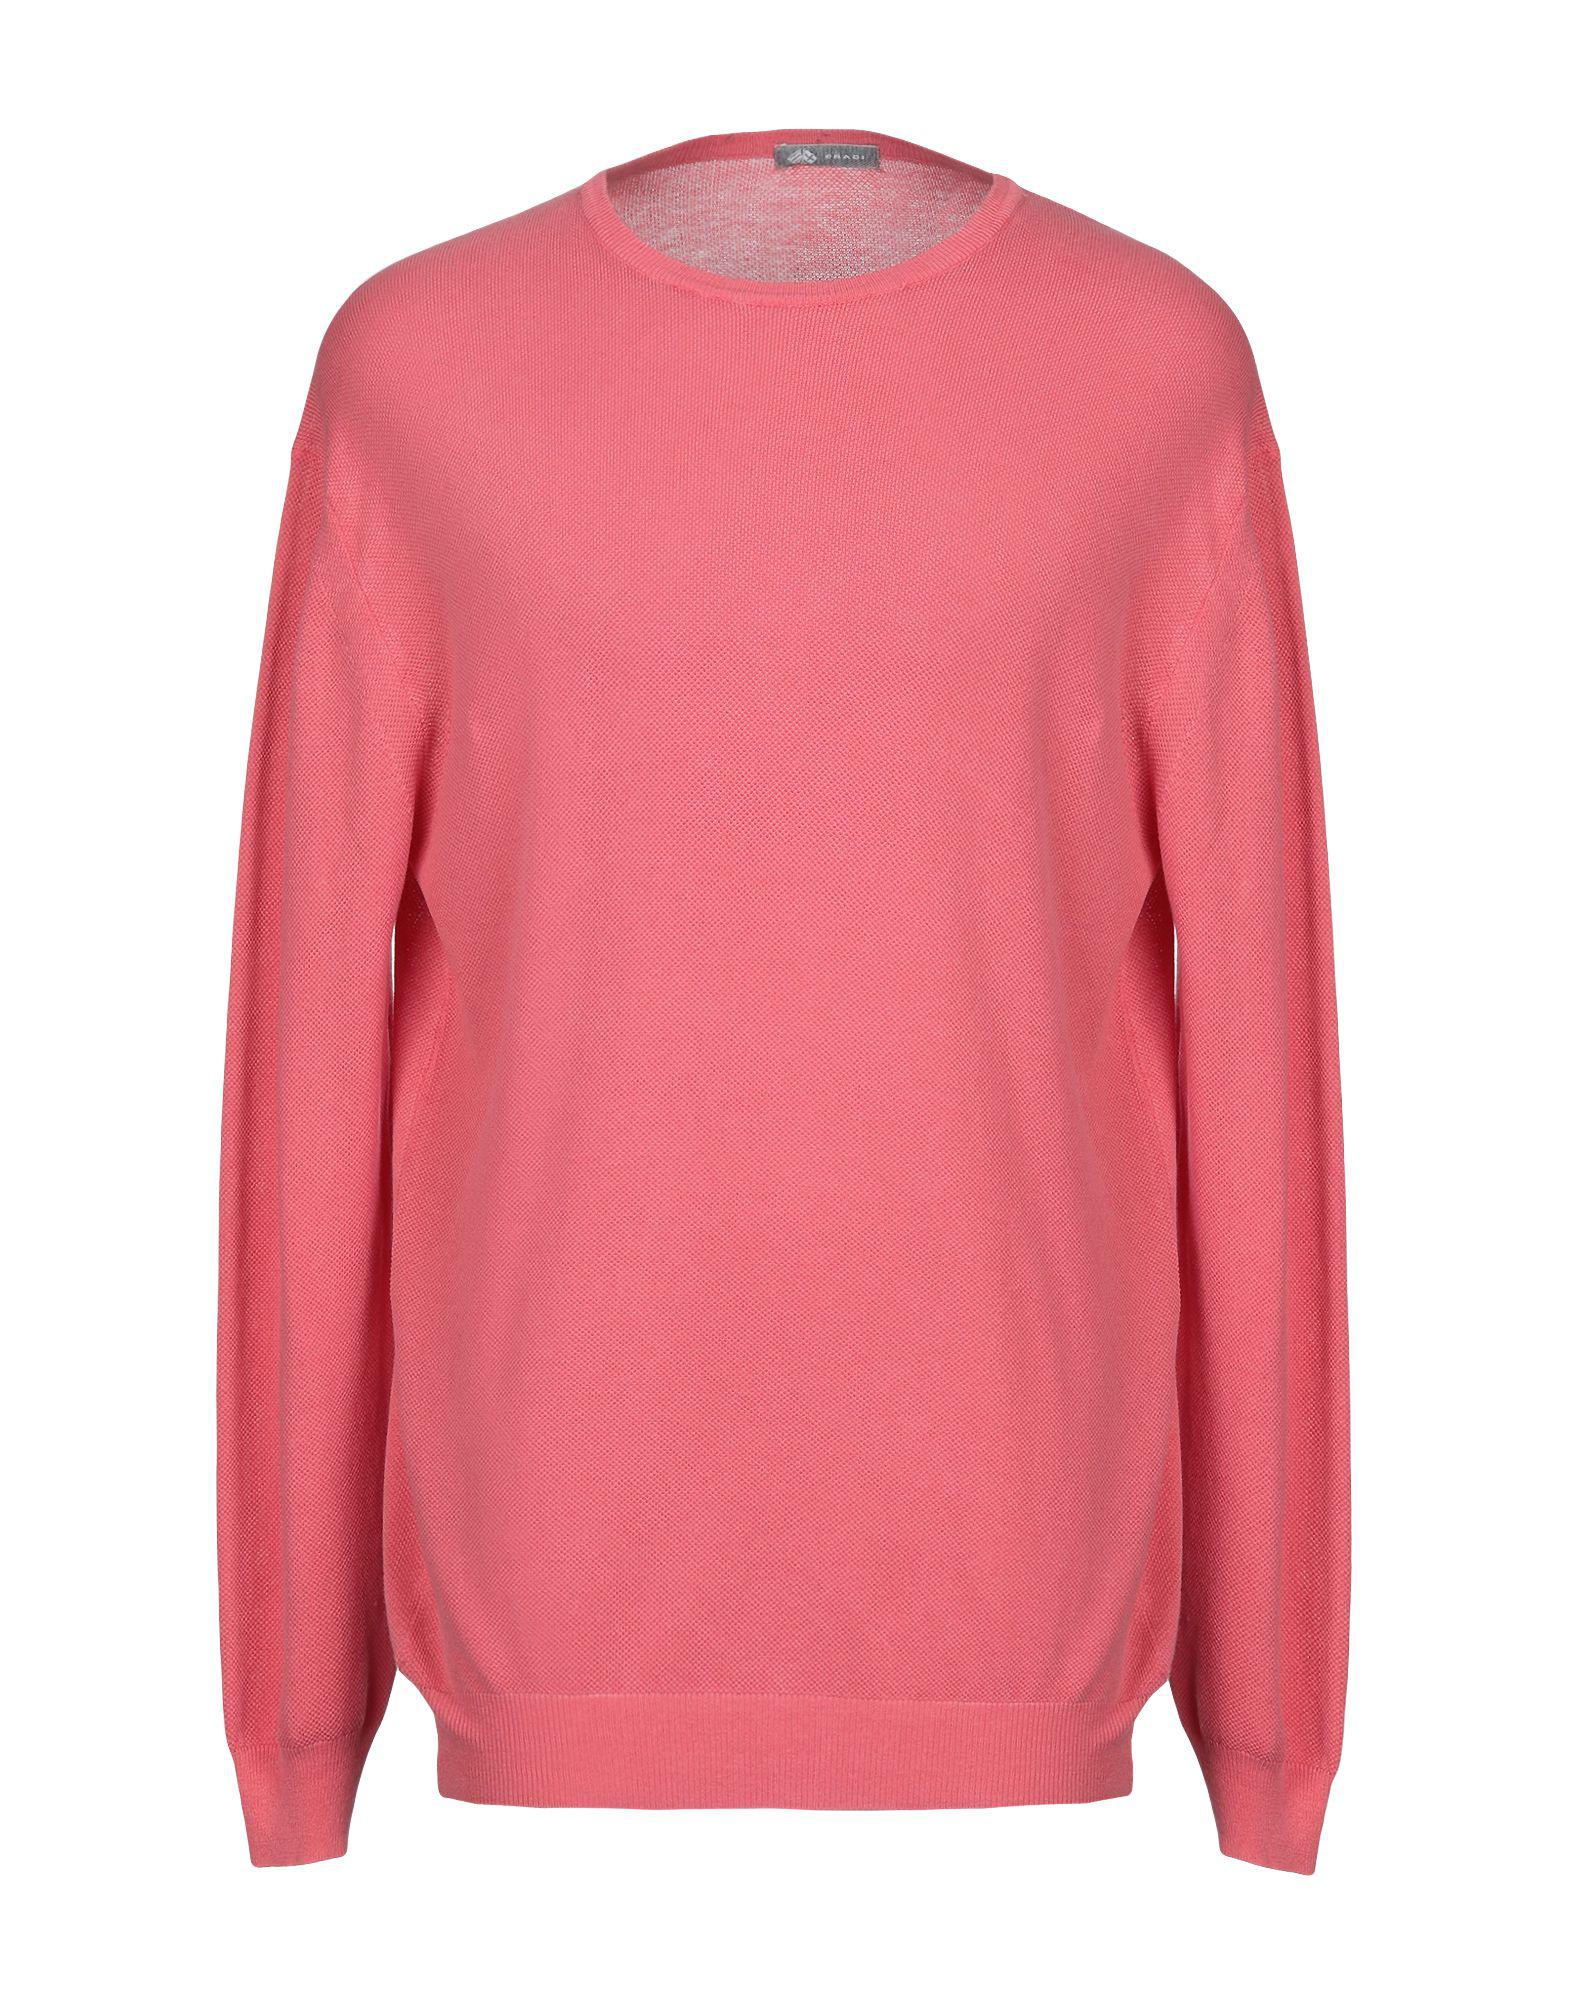 Lyst - Fradi Sweater in Pink for Men